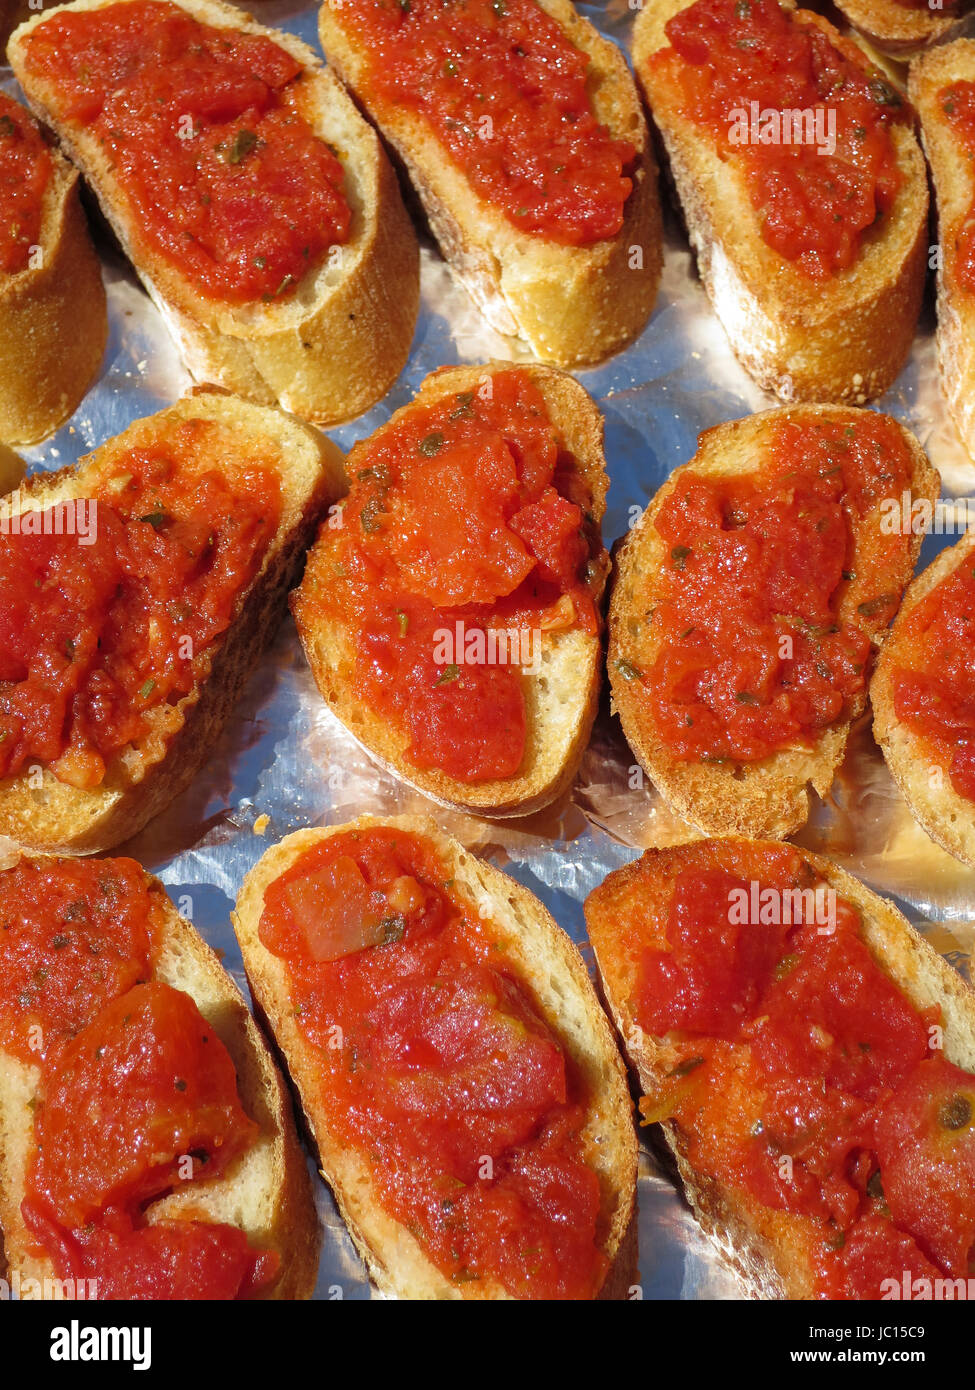 Pan of delicious bruschetta appetizers made by spreading the tomato-based bruschetta sauce on toasted french toast slices. Stock Photo